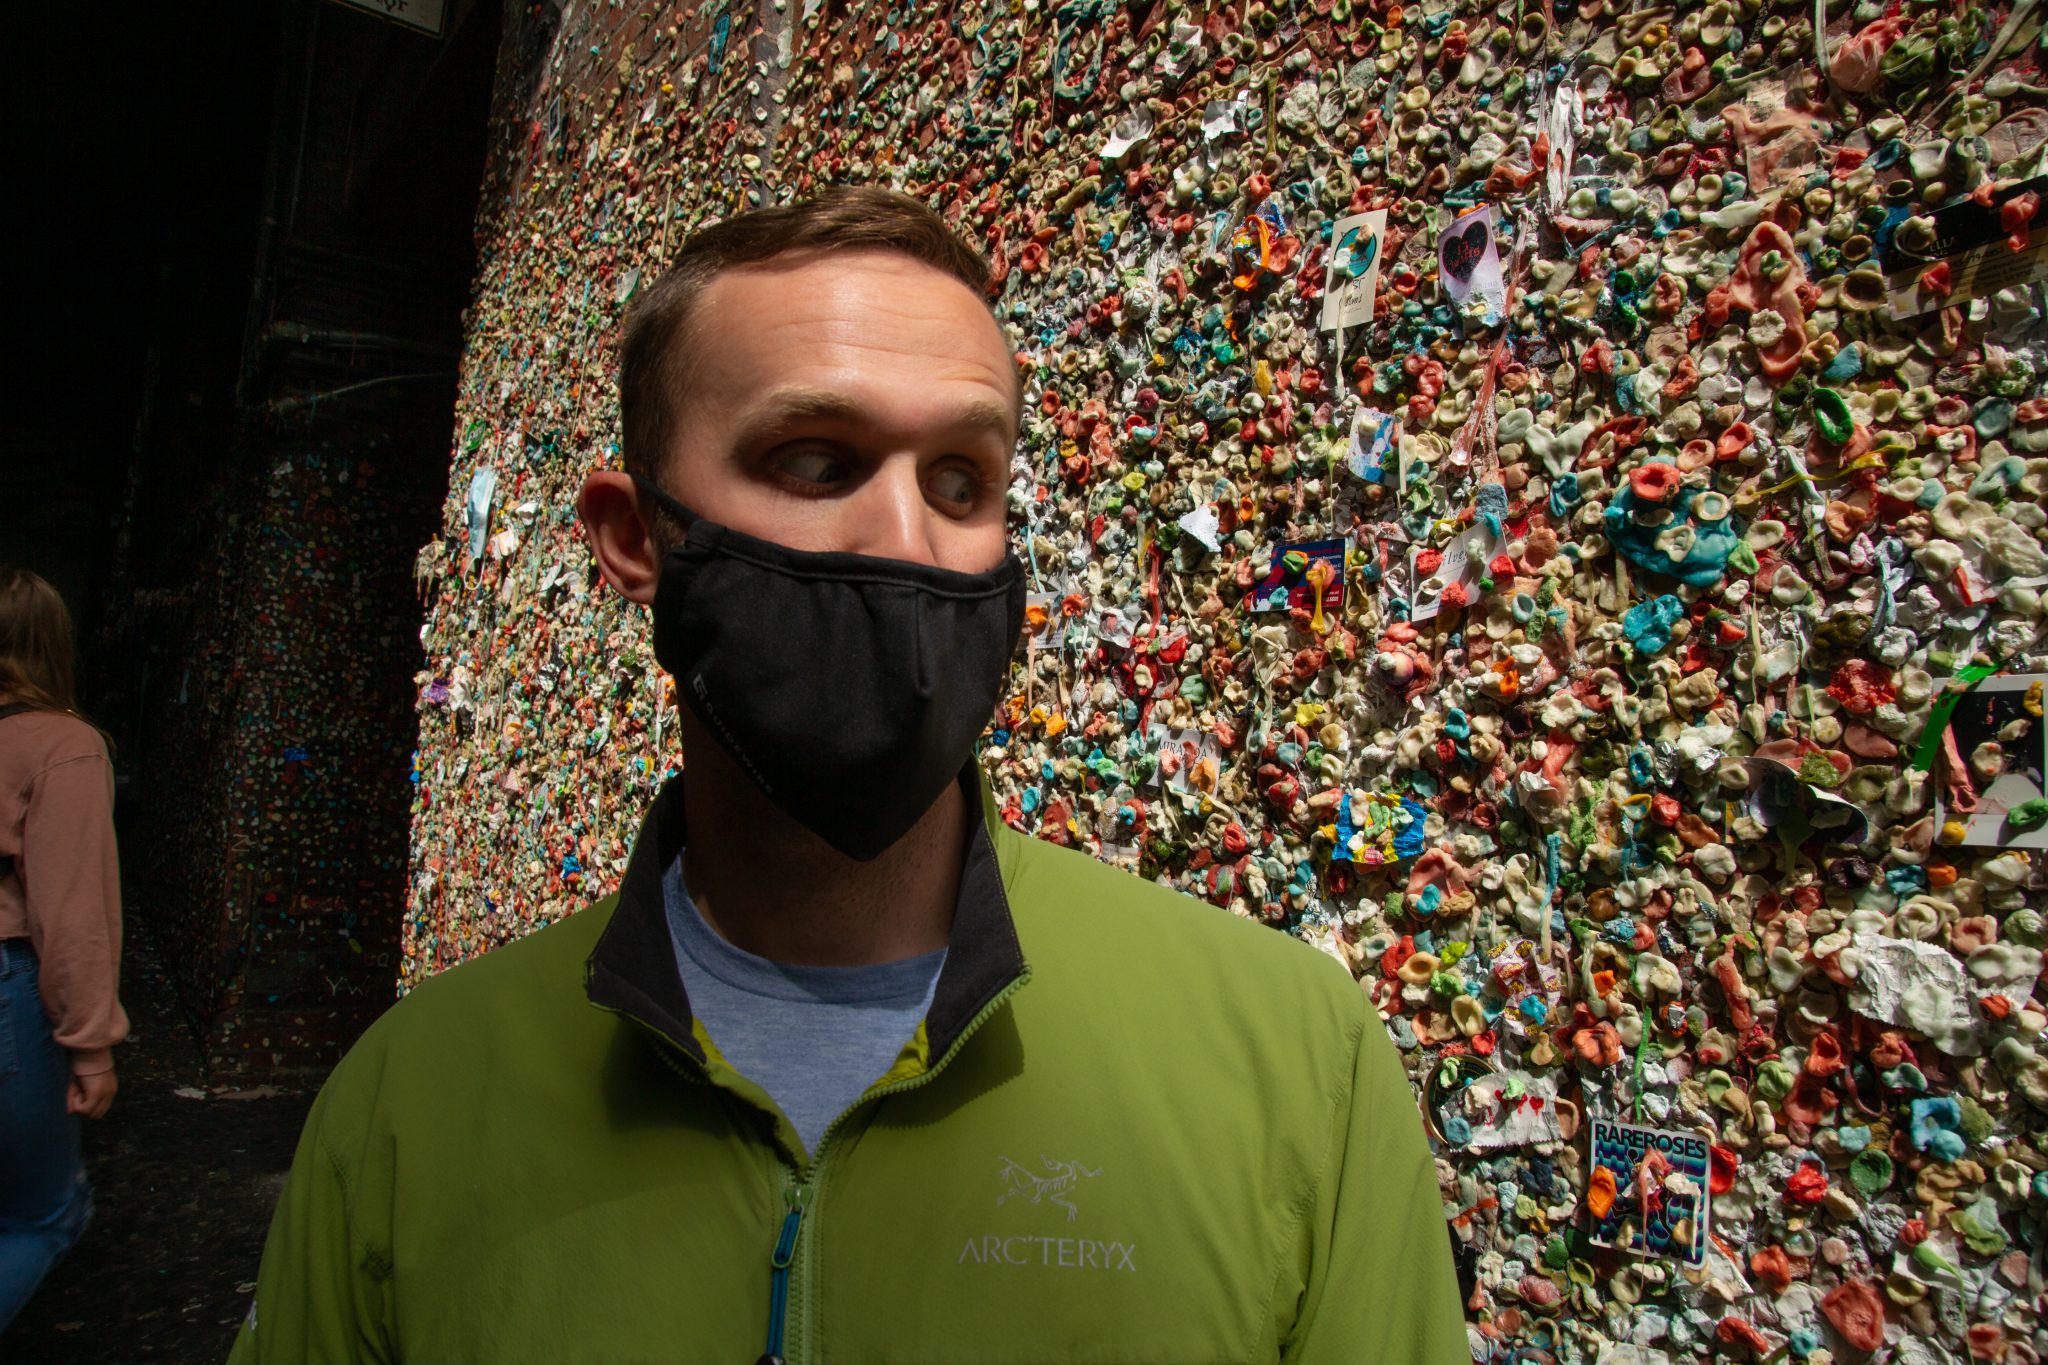 A man stands in front of the infamous gum wall in Seattle, wearing a face mask and green pull-over jacket.